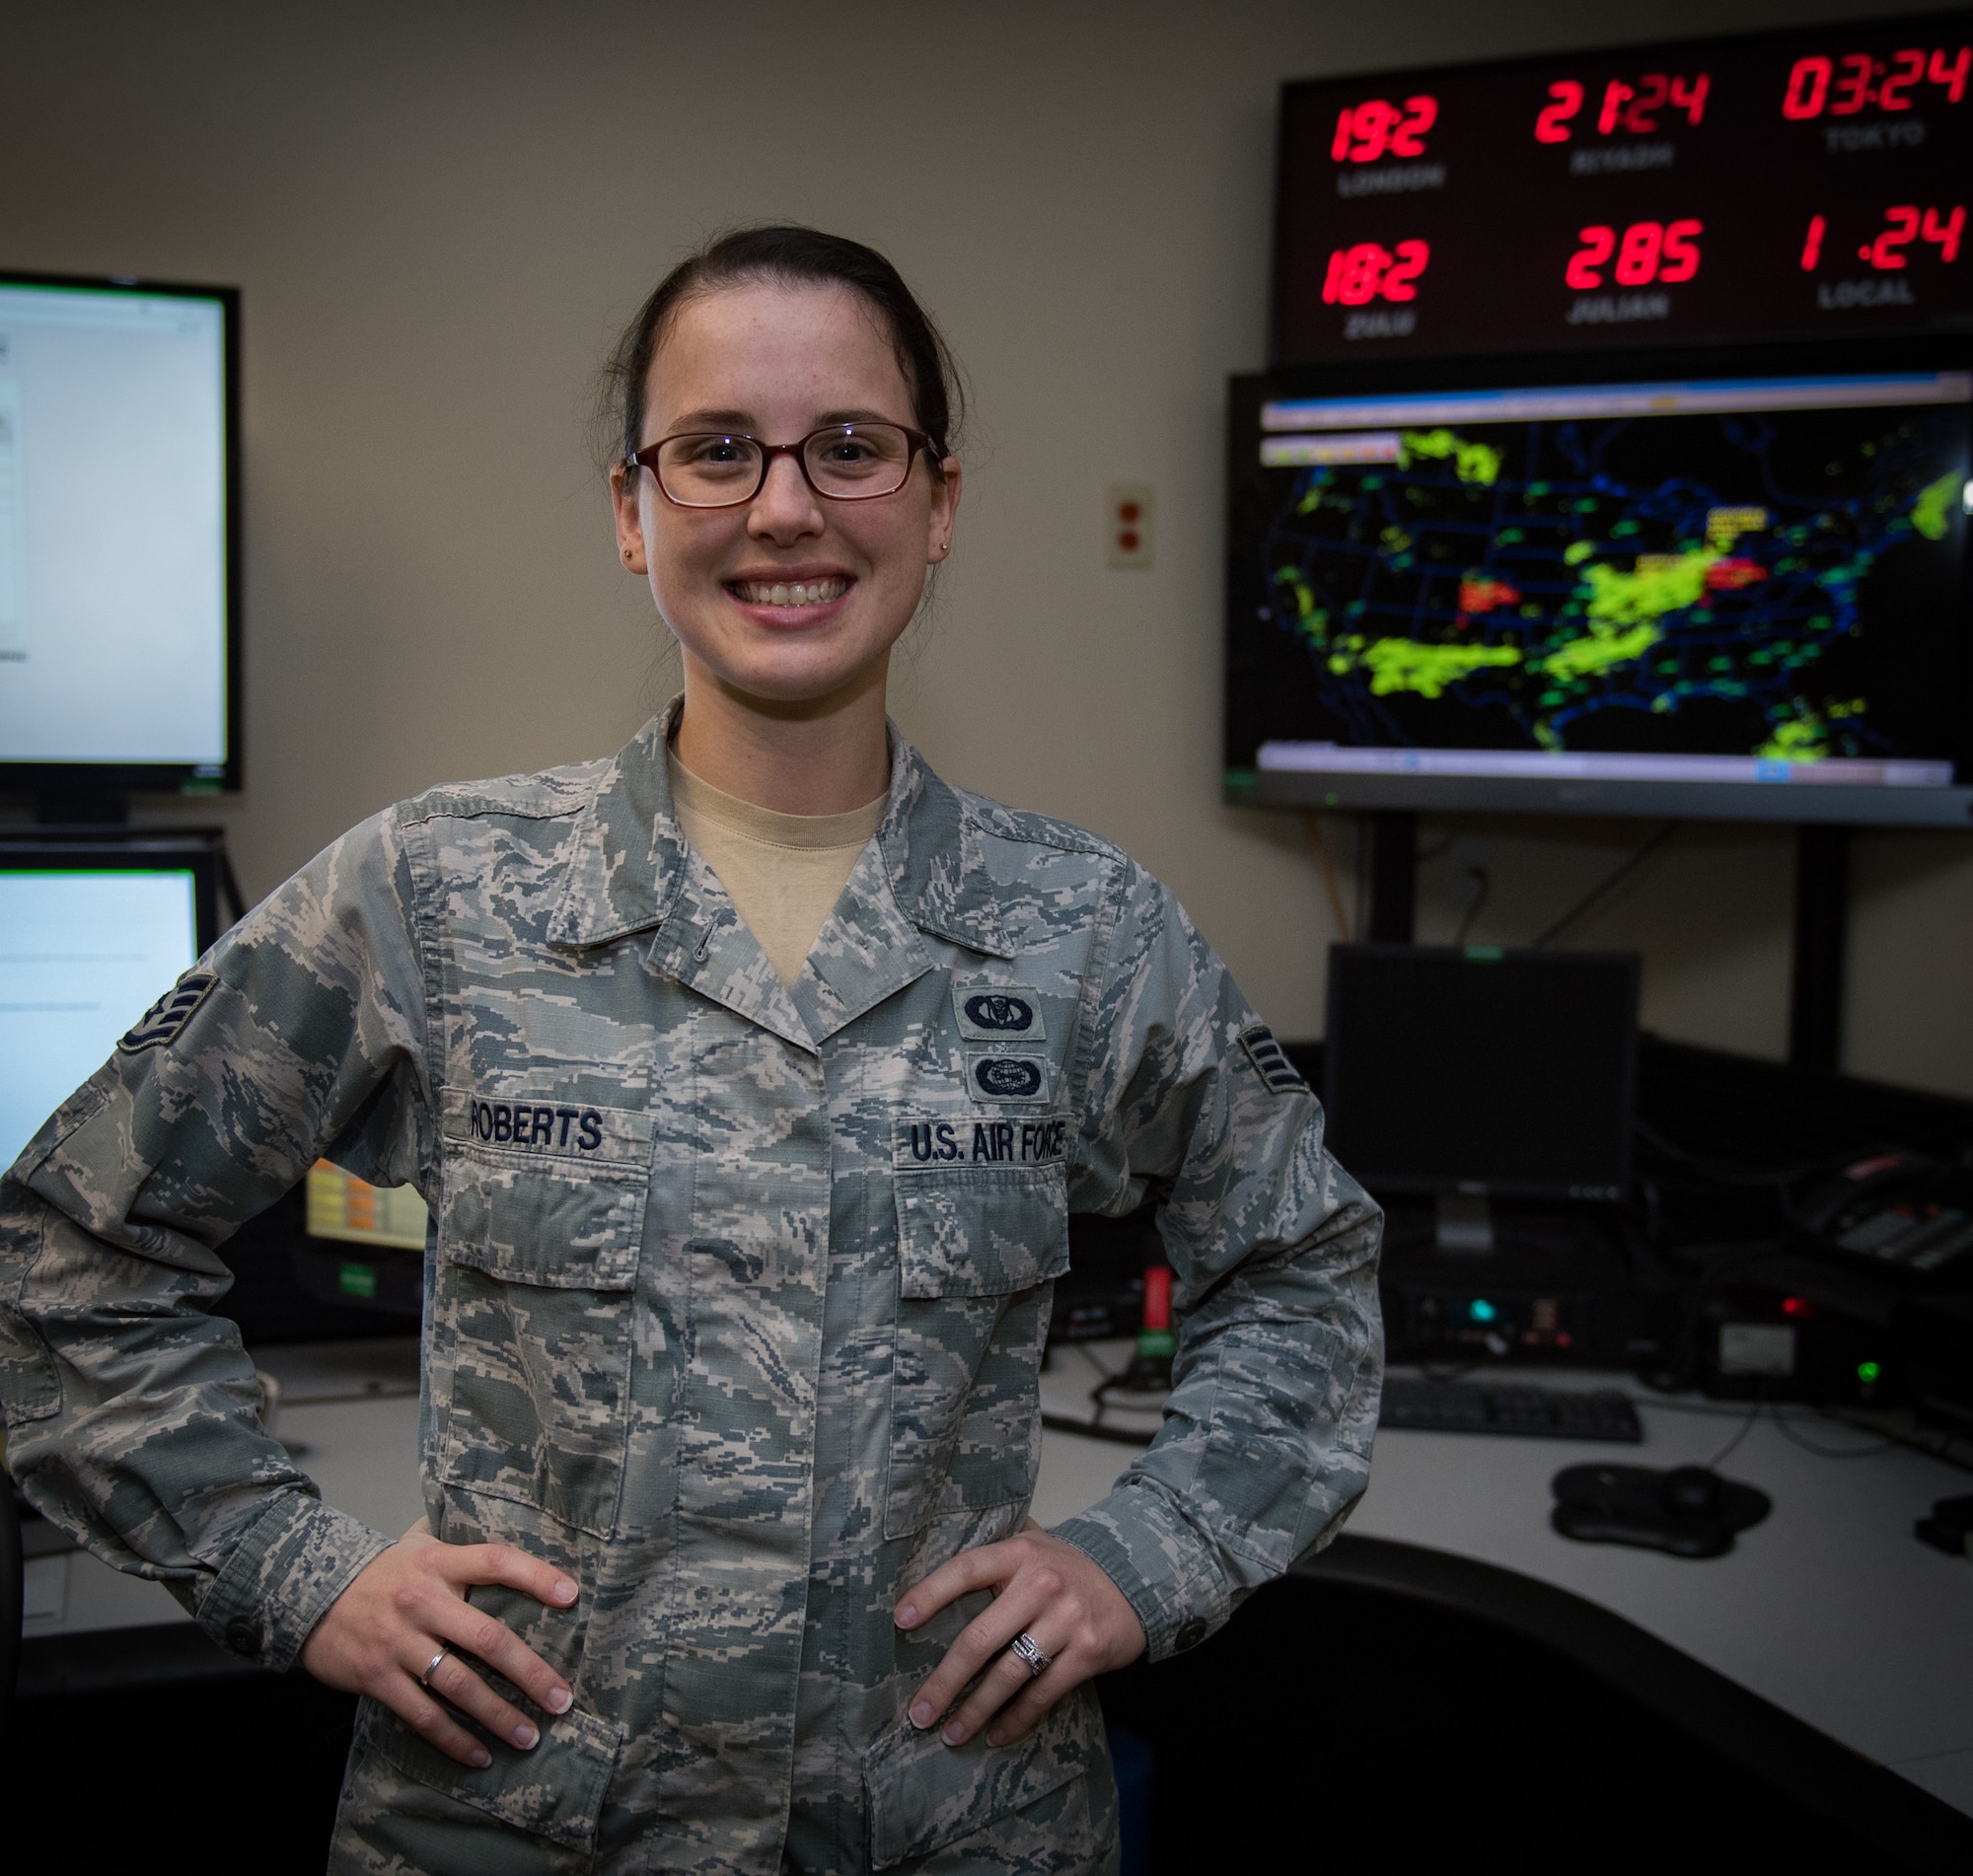 932nd Airlift Wing Airman Spotlight on Command Post technician, Staff Sgt. Jessica Roberts.